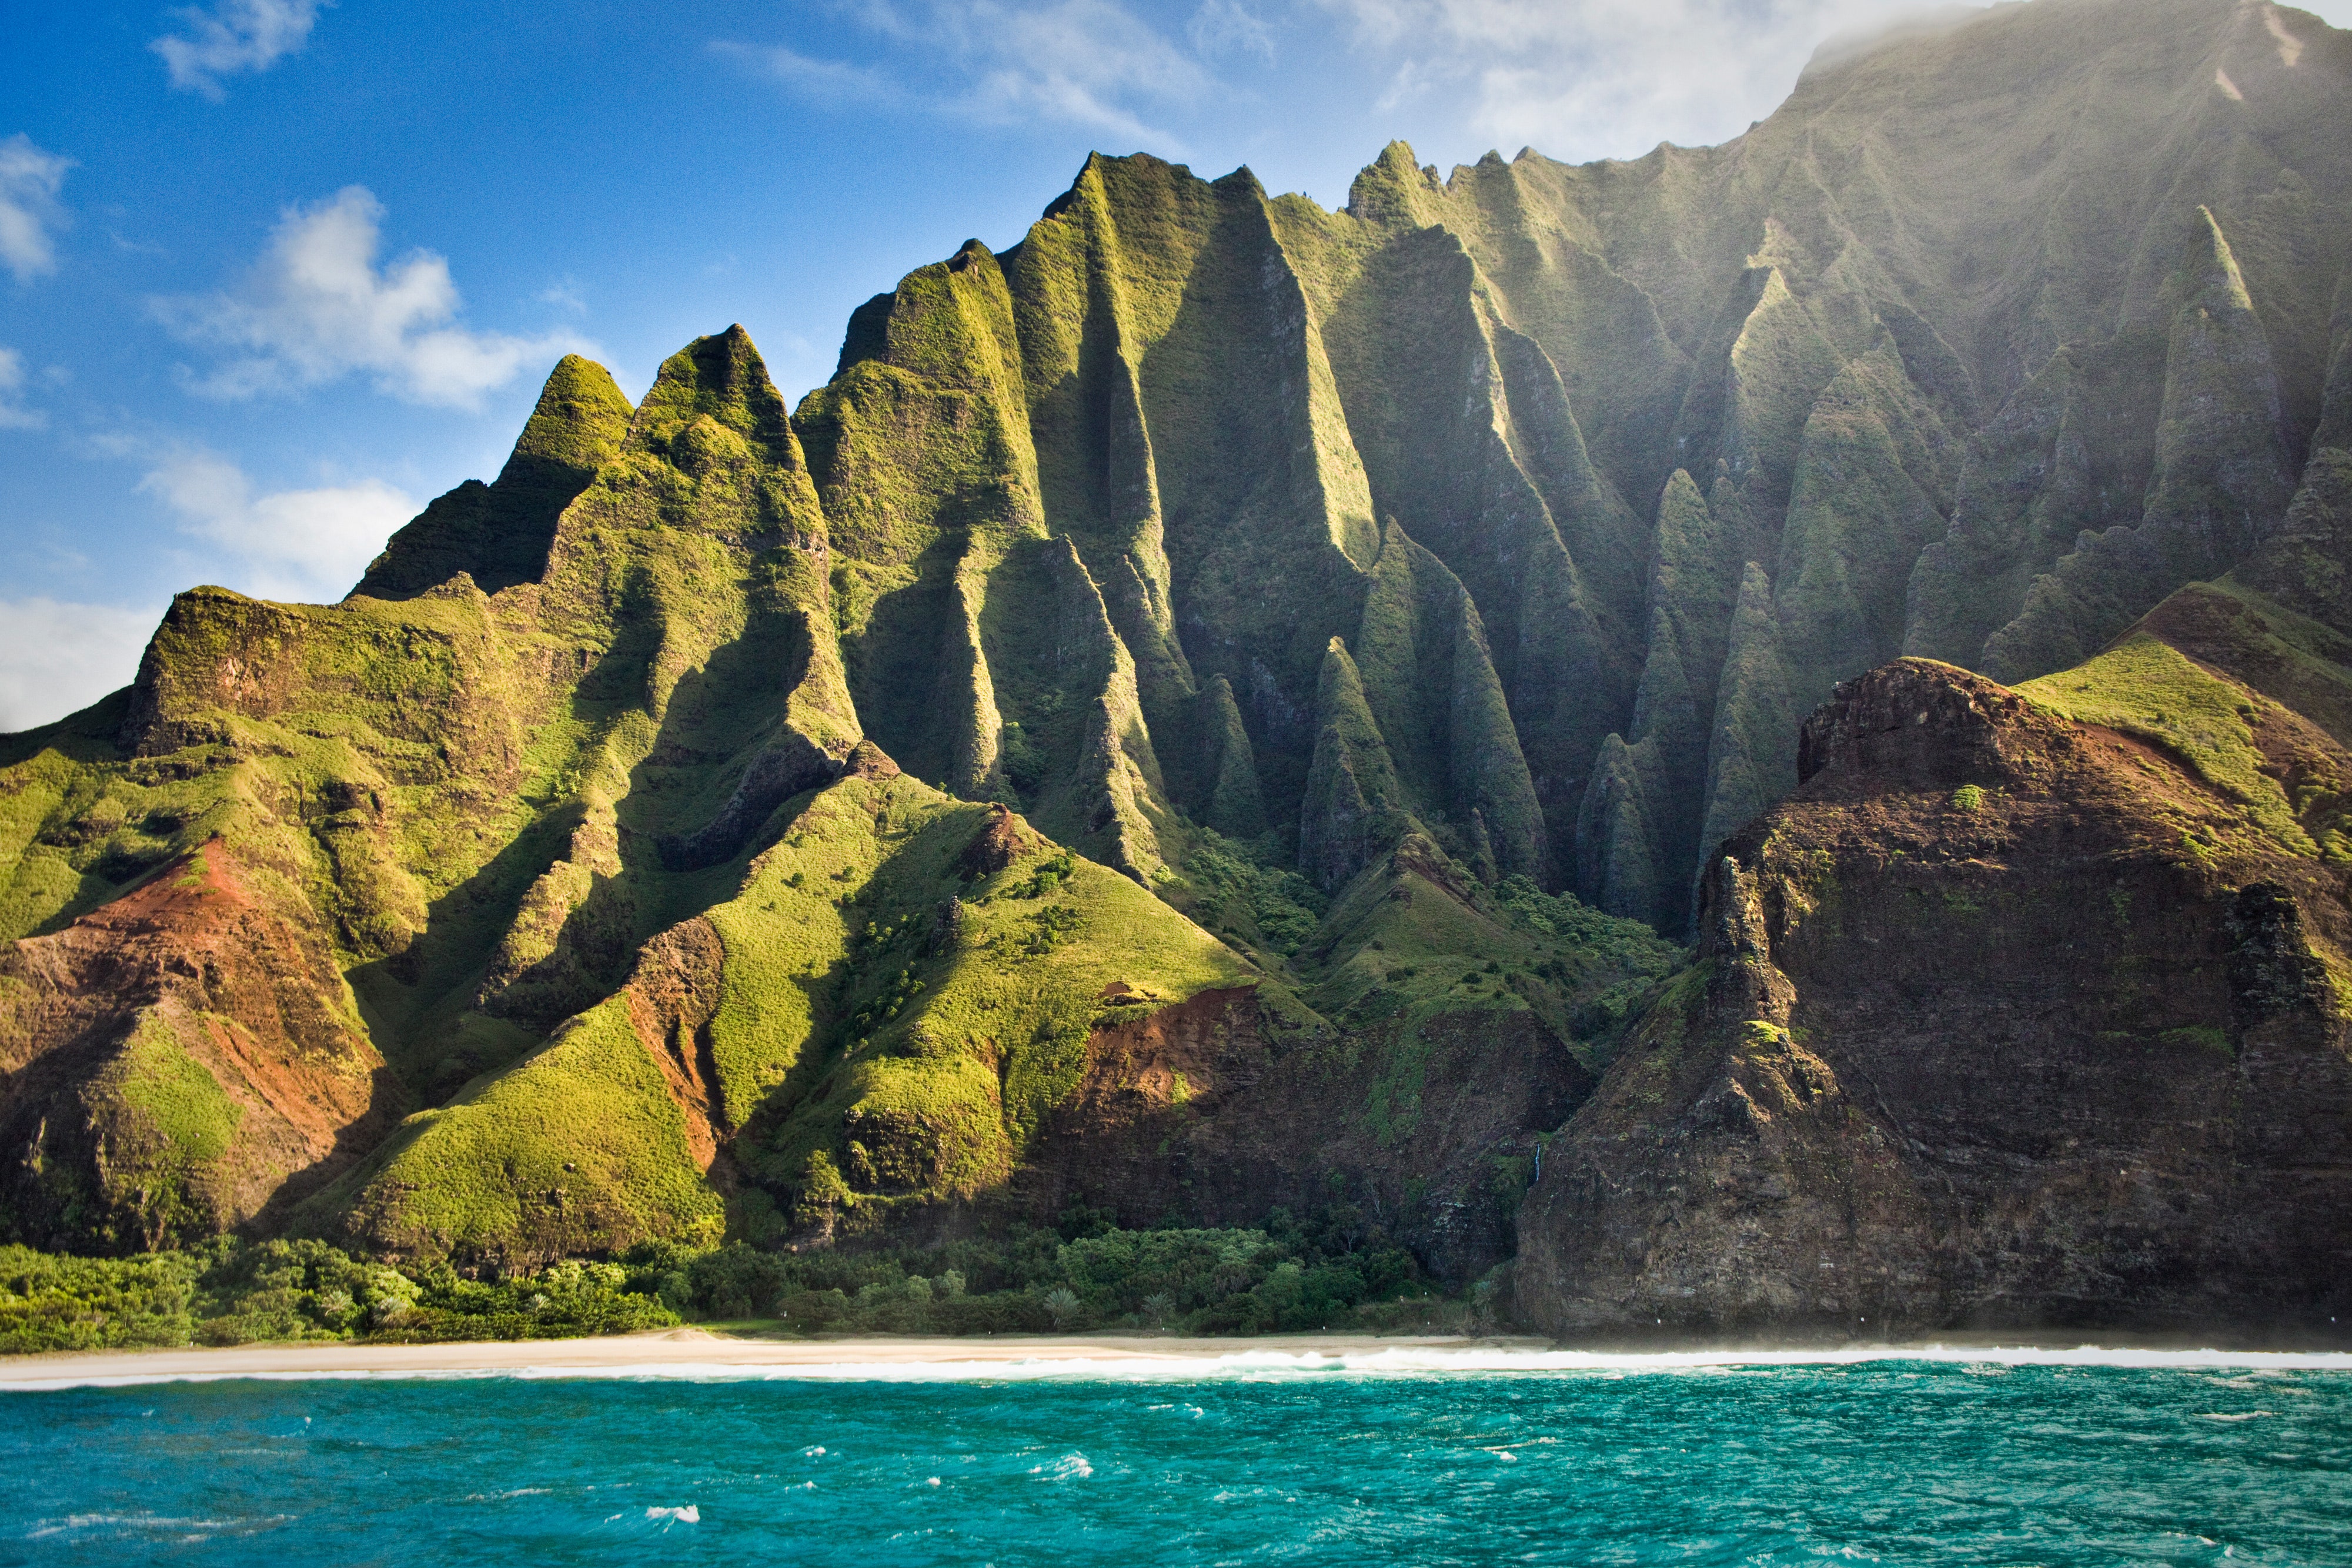 Kauai has one of the world’s most <a href="https://www.cntraveler.com/galleries/2015-09-29/the-worlds-most-insanely-beautiful-coastlines?mbid=synd_msn_rss&utm_source=msn&utm_medium=syndication">gorgeous coastlines</a>, with towering waterfalls and isolated crescent beaches. Just be prepared to put in a little effort to soak up its wonders: Na Pali can only be seen from a helicopter, catamaran, or a rather grueling hike.<p>Sign up to receive the latest news, expert tips, and inspiration on all things travel</p><a href="https://www.cntraveler.com/newsletter/the-daily?sourceCode=msnsend">Inspire Me</a>